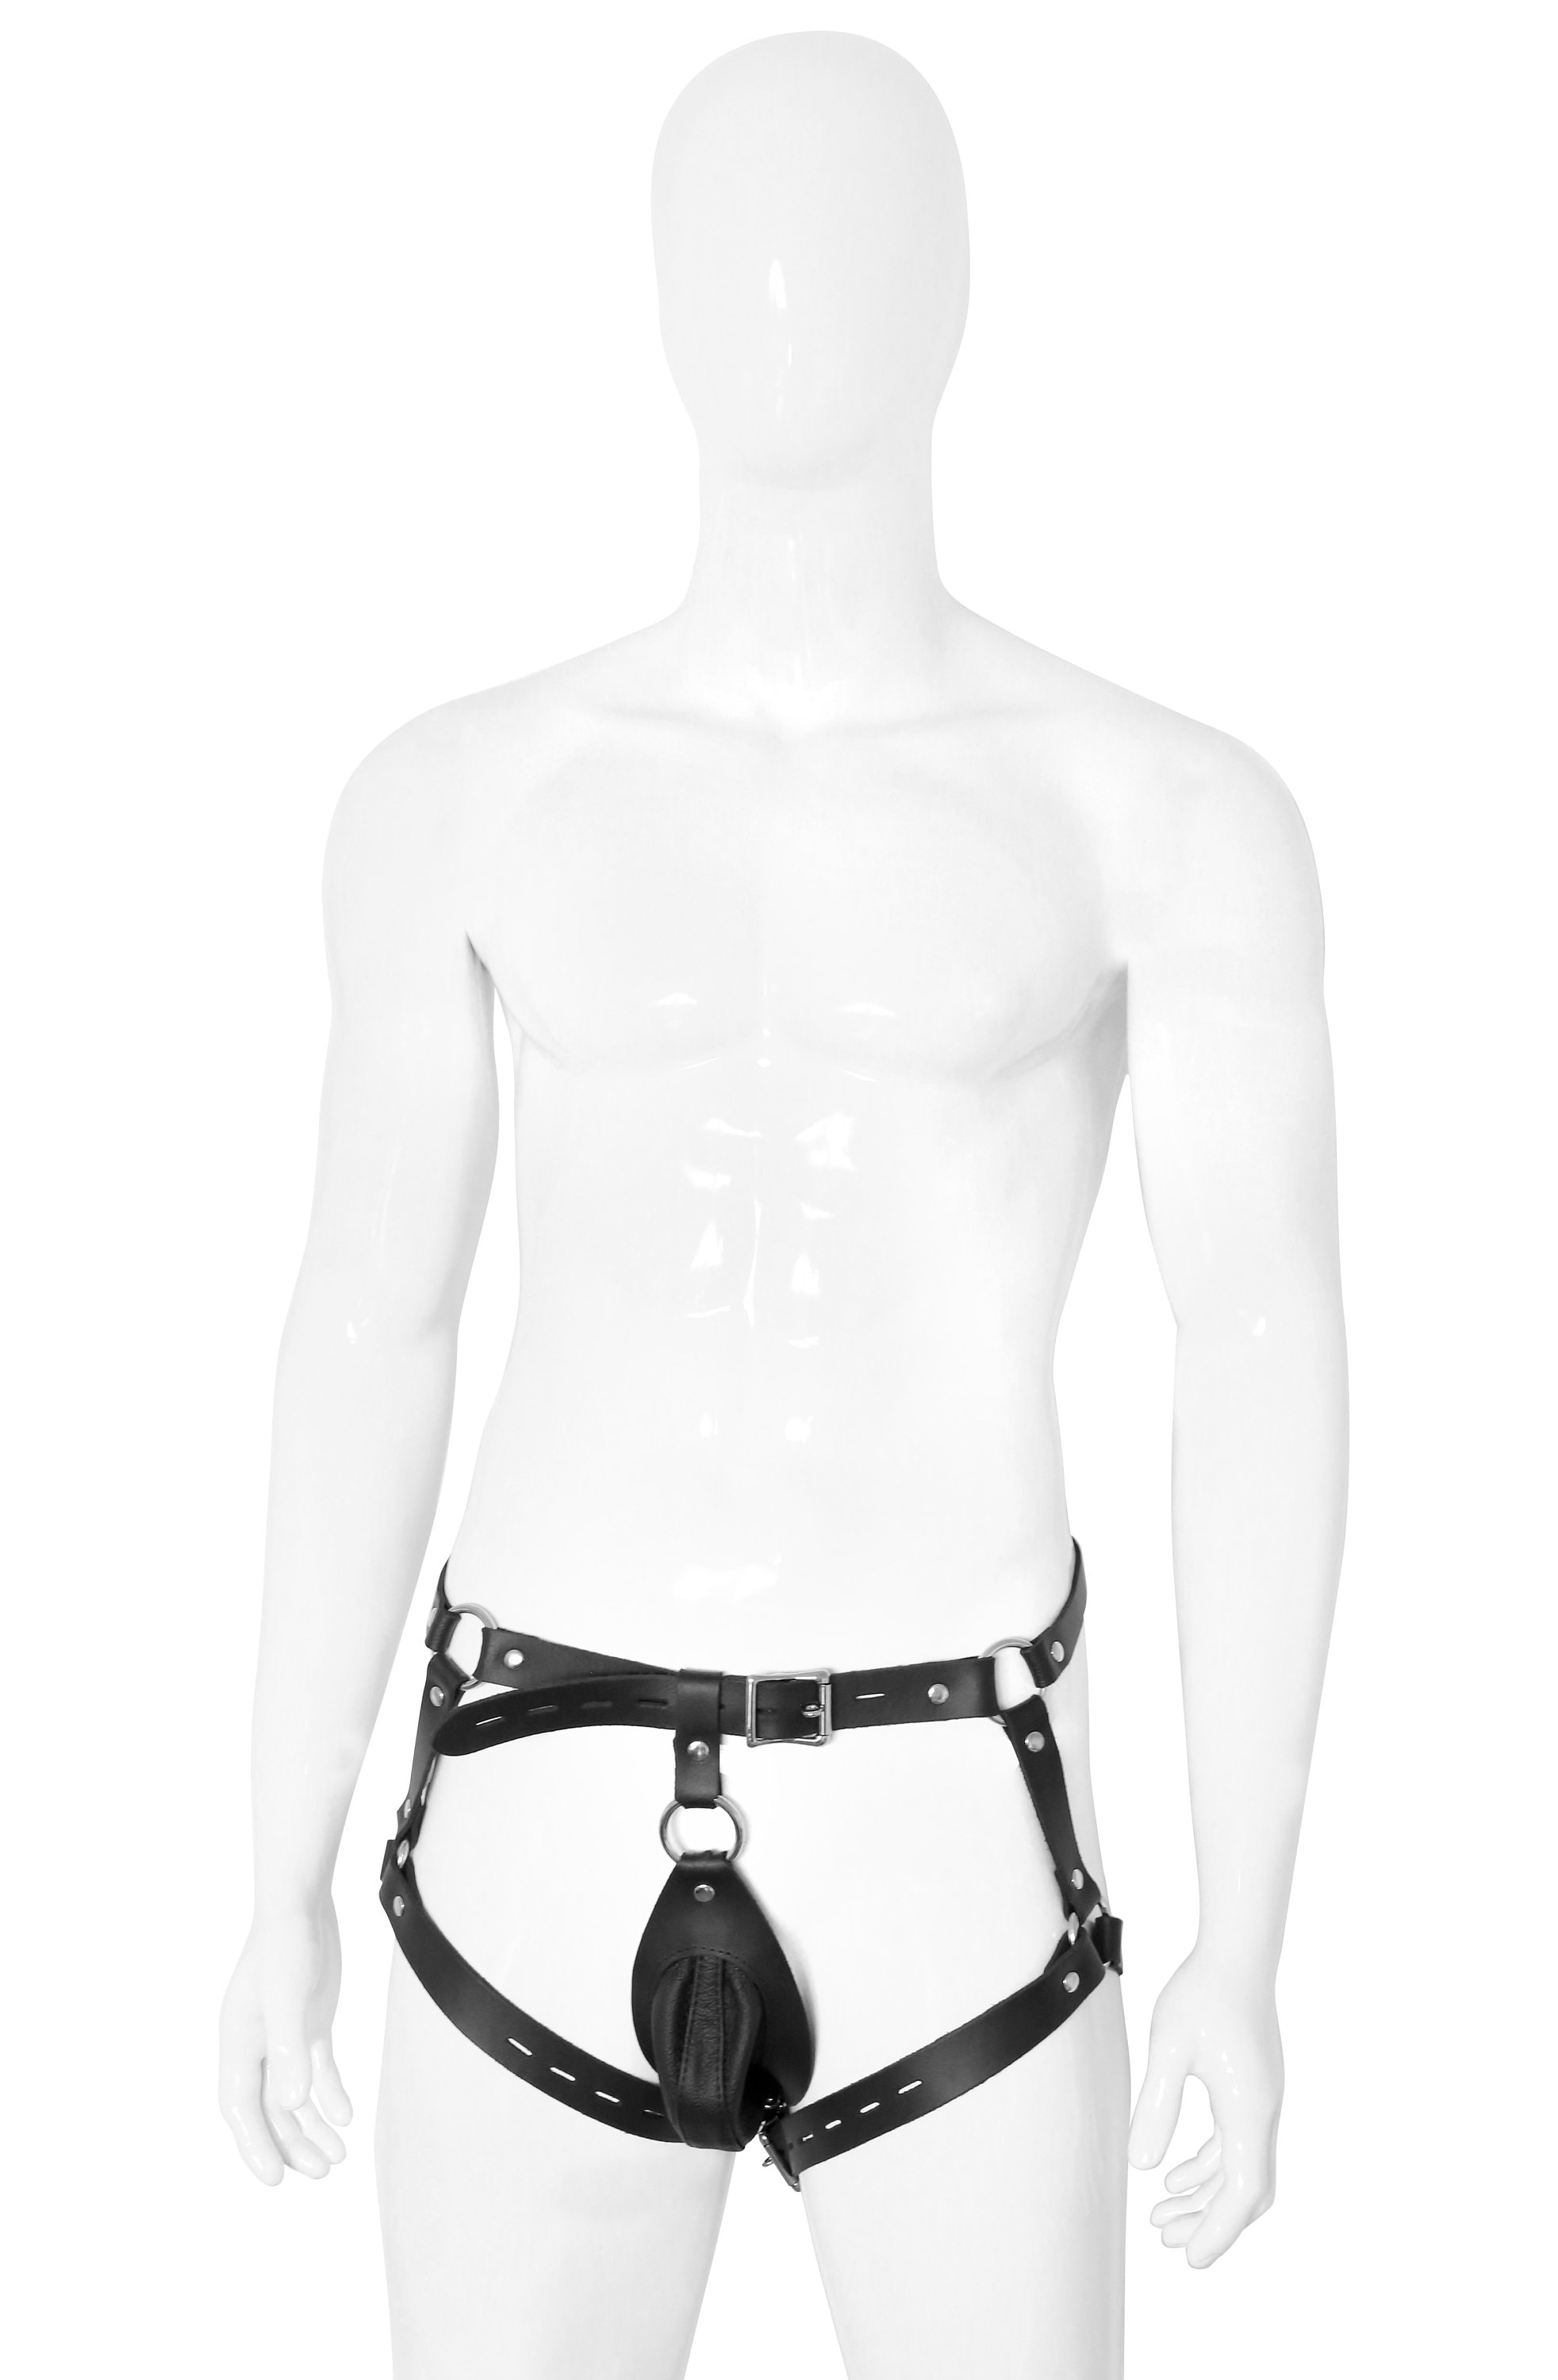 andrew mellert recommends chastity belt bdsm pic